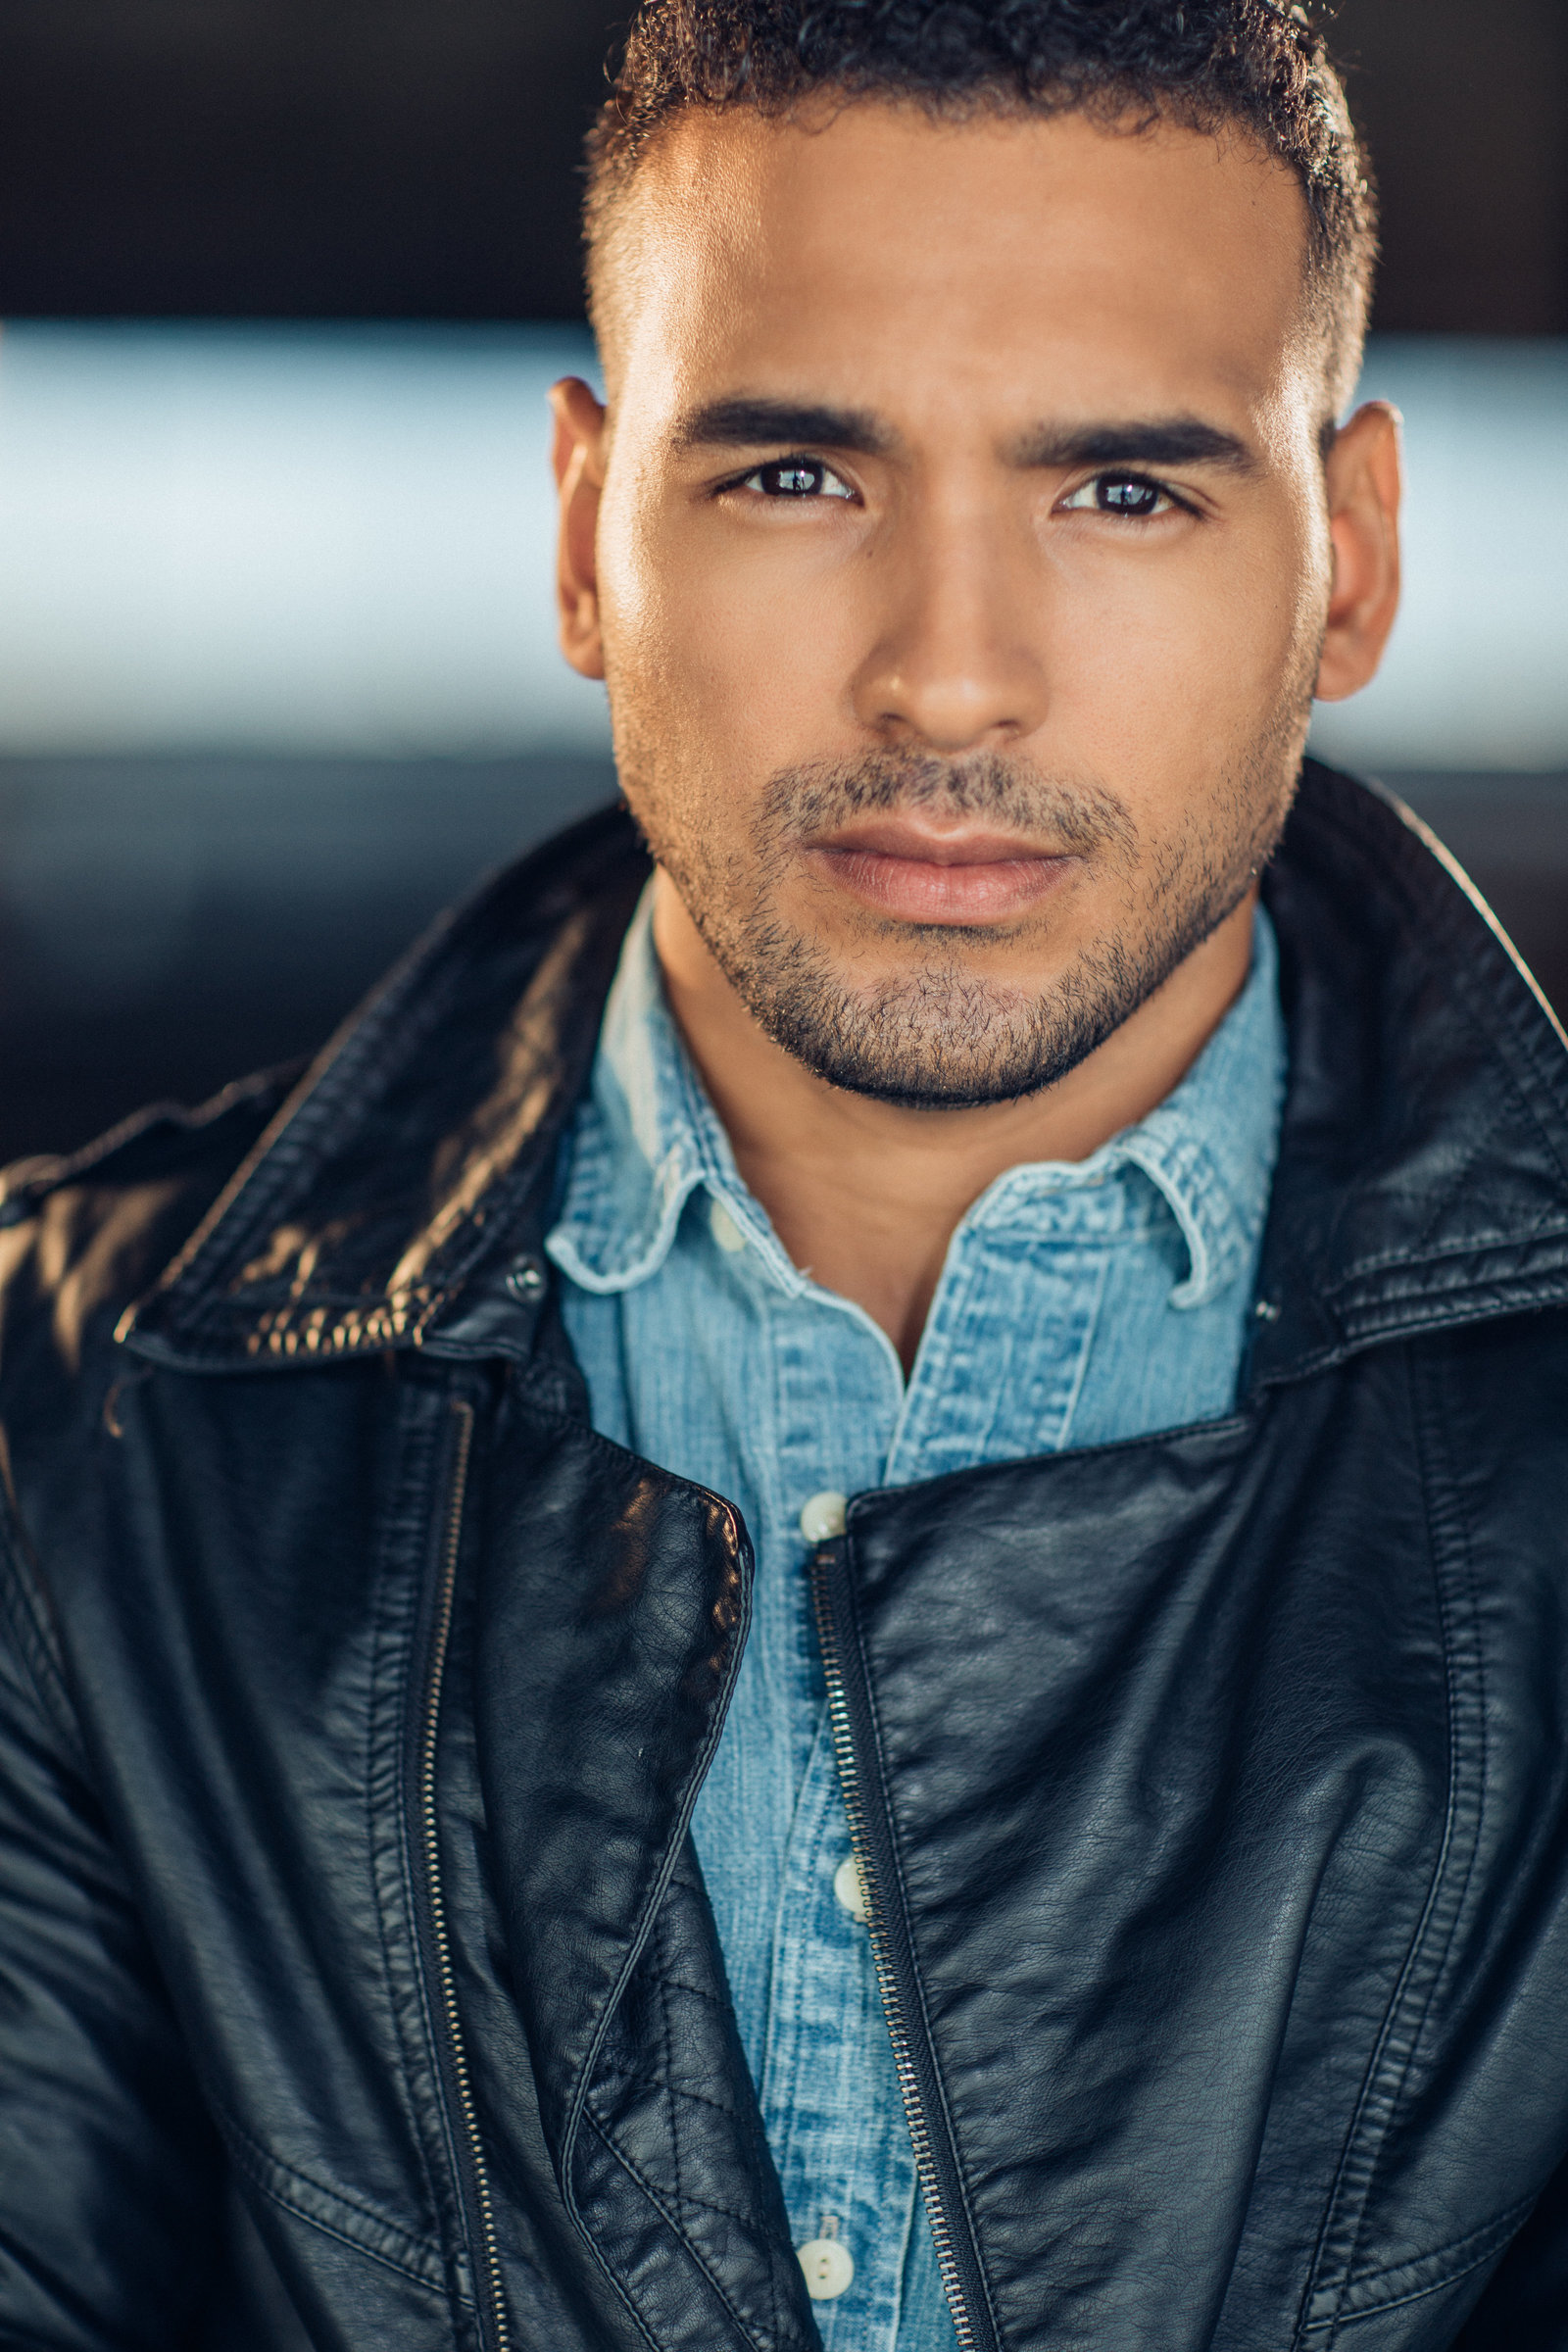 Headshot Photograph Of Young In Black Leather Jacket And Blue Denim Polo Los Angeles